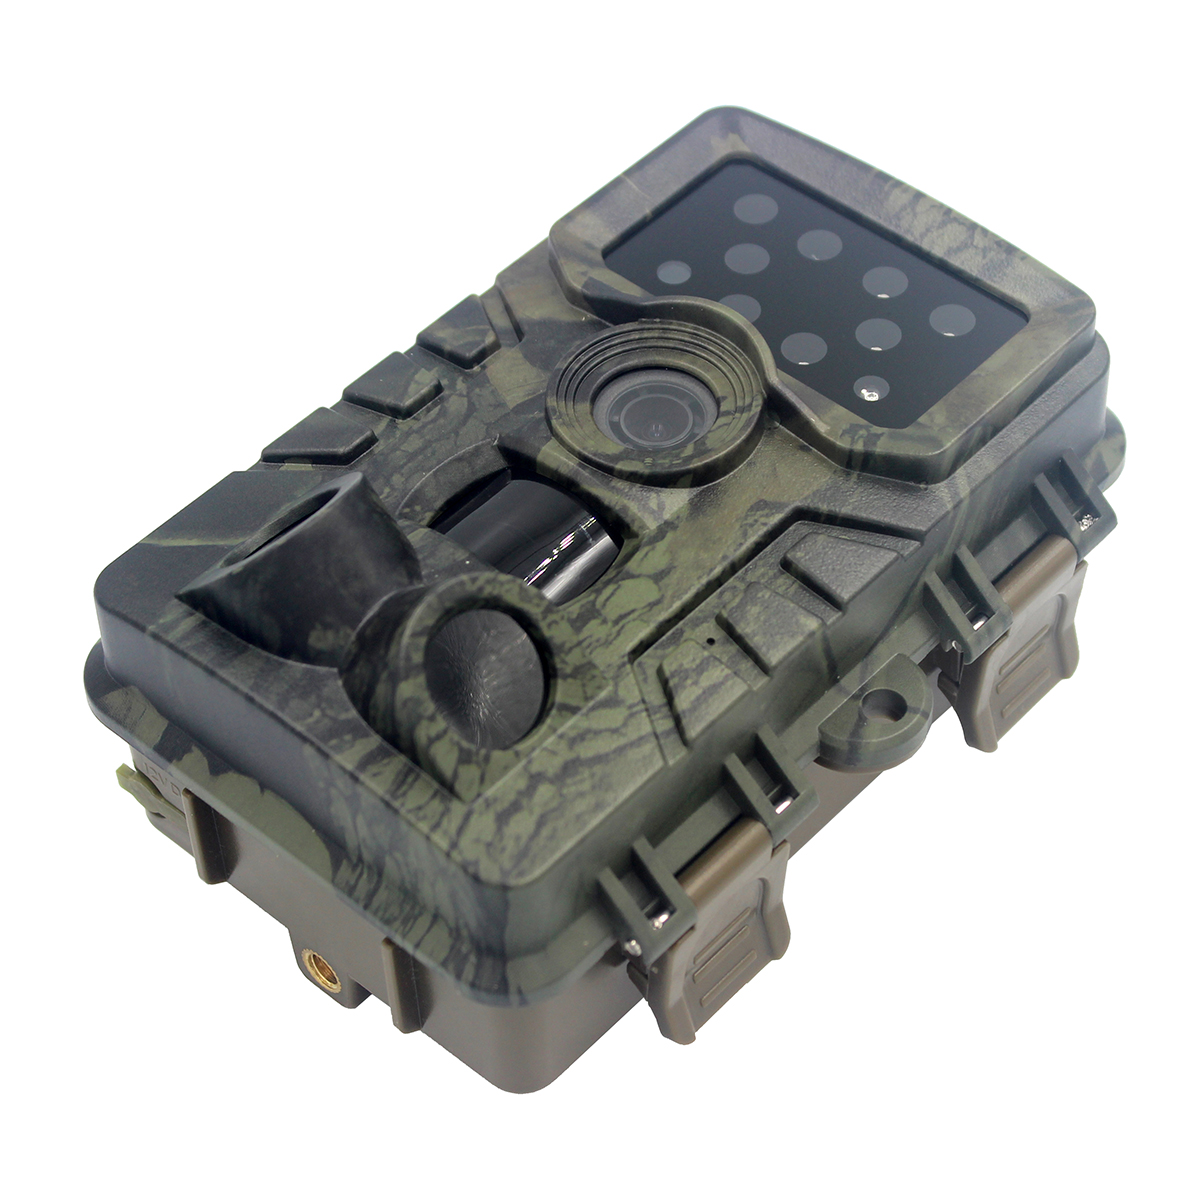 Find PR700 20MP 1080P 120ÂDetecting Range Hunting Trail Camera Waterproof Hunting Scouting Camera with Auto IR Filter for Wildlife Monitoring for Sale on Gipsybee.com with cryptocurrencies